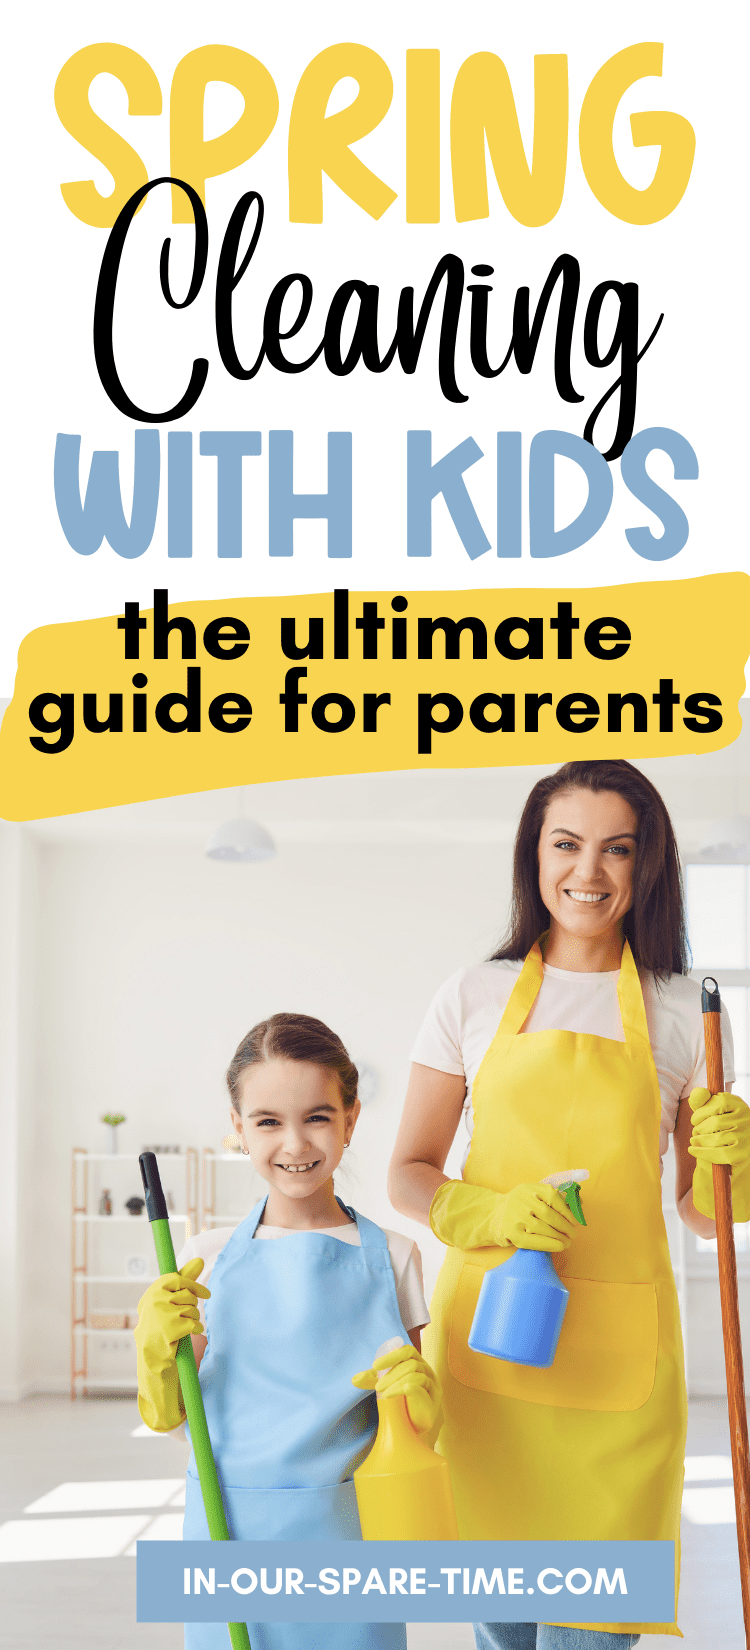 These tips for spring cleaning with kids will let you get the kids involved and have fun with household chores. Learn more about how to make spring cleaning fun.